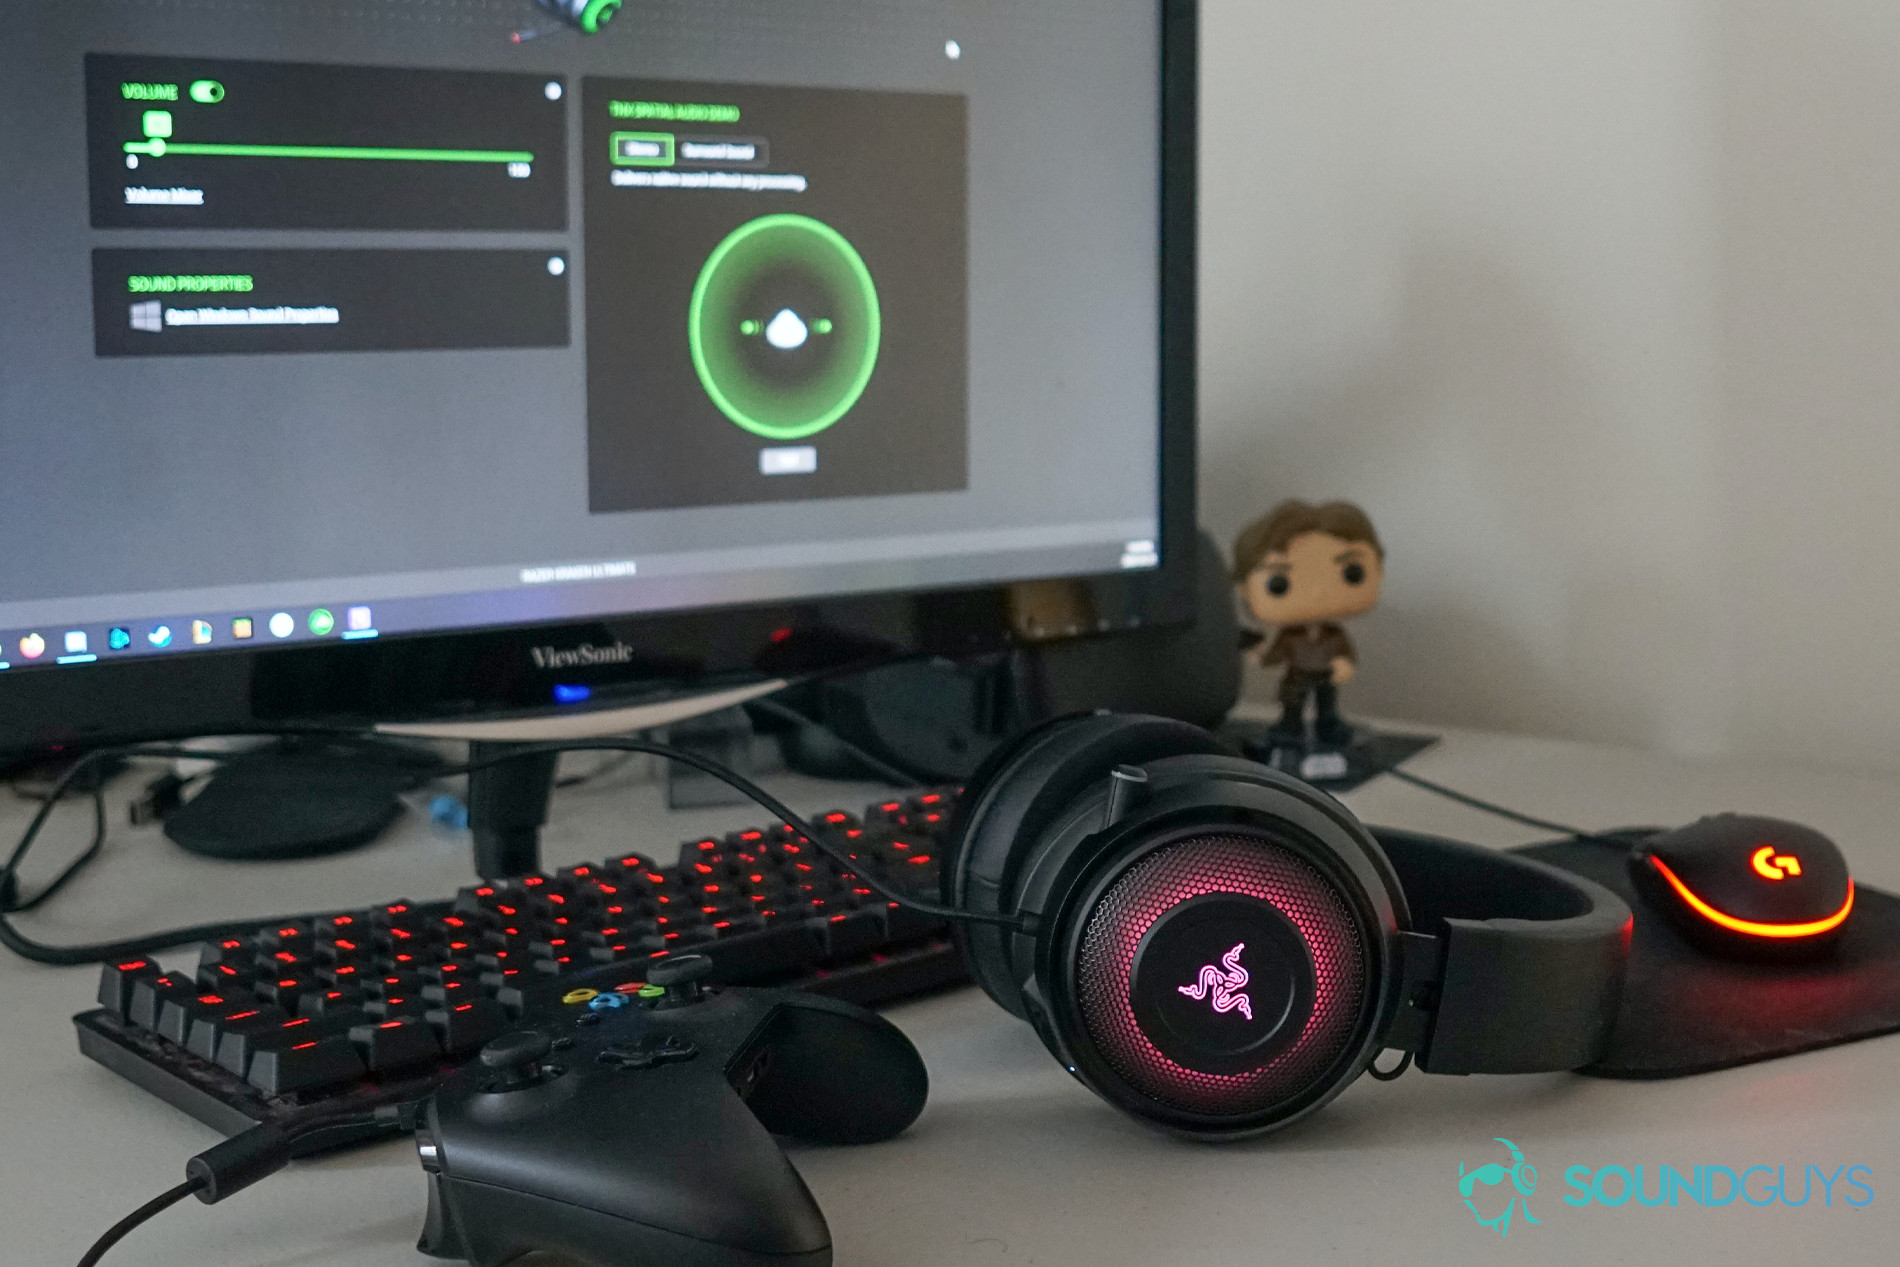 A picture of the Razer Kraken Ultimate on a desktop with the monitor open to the Synapse software.